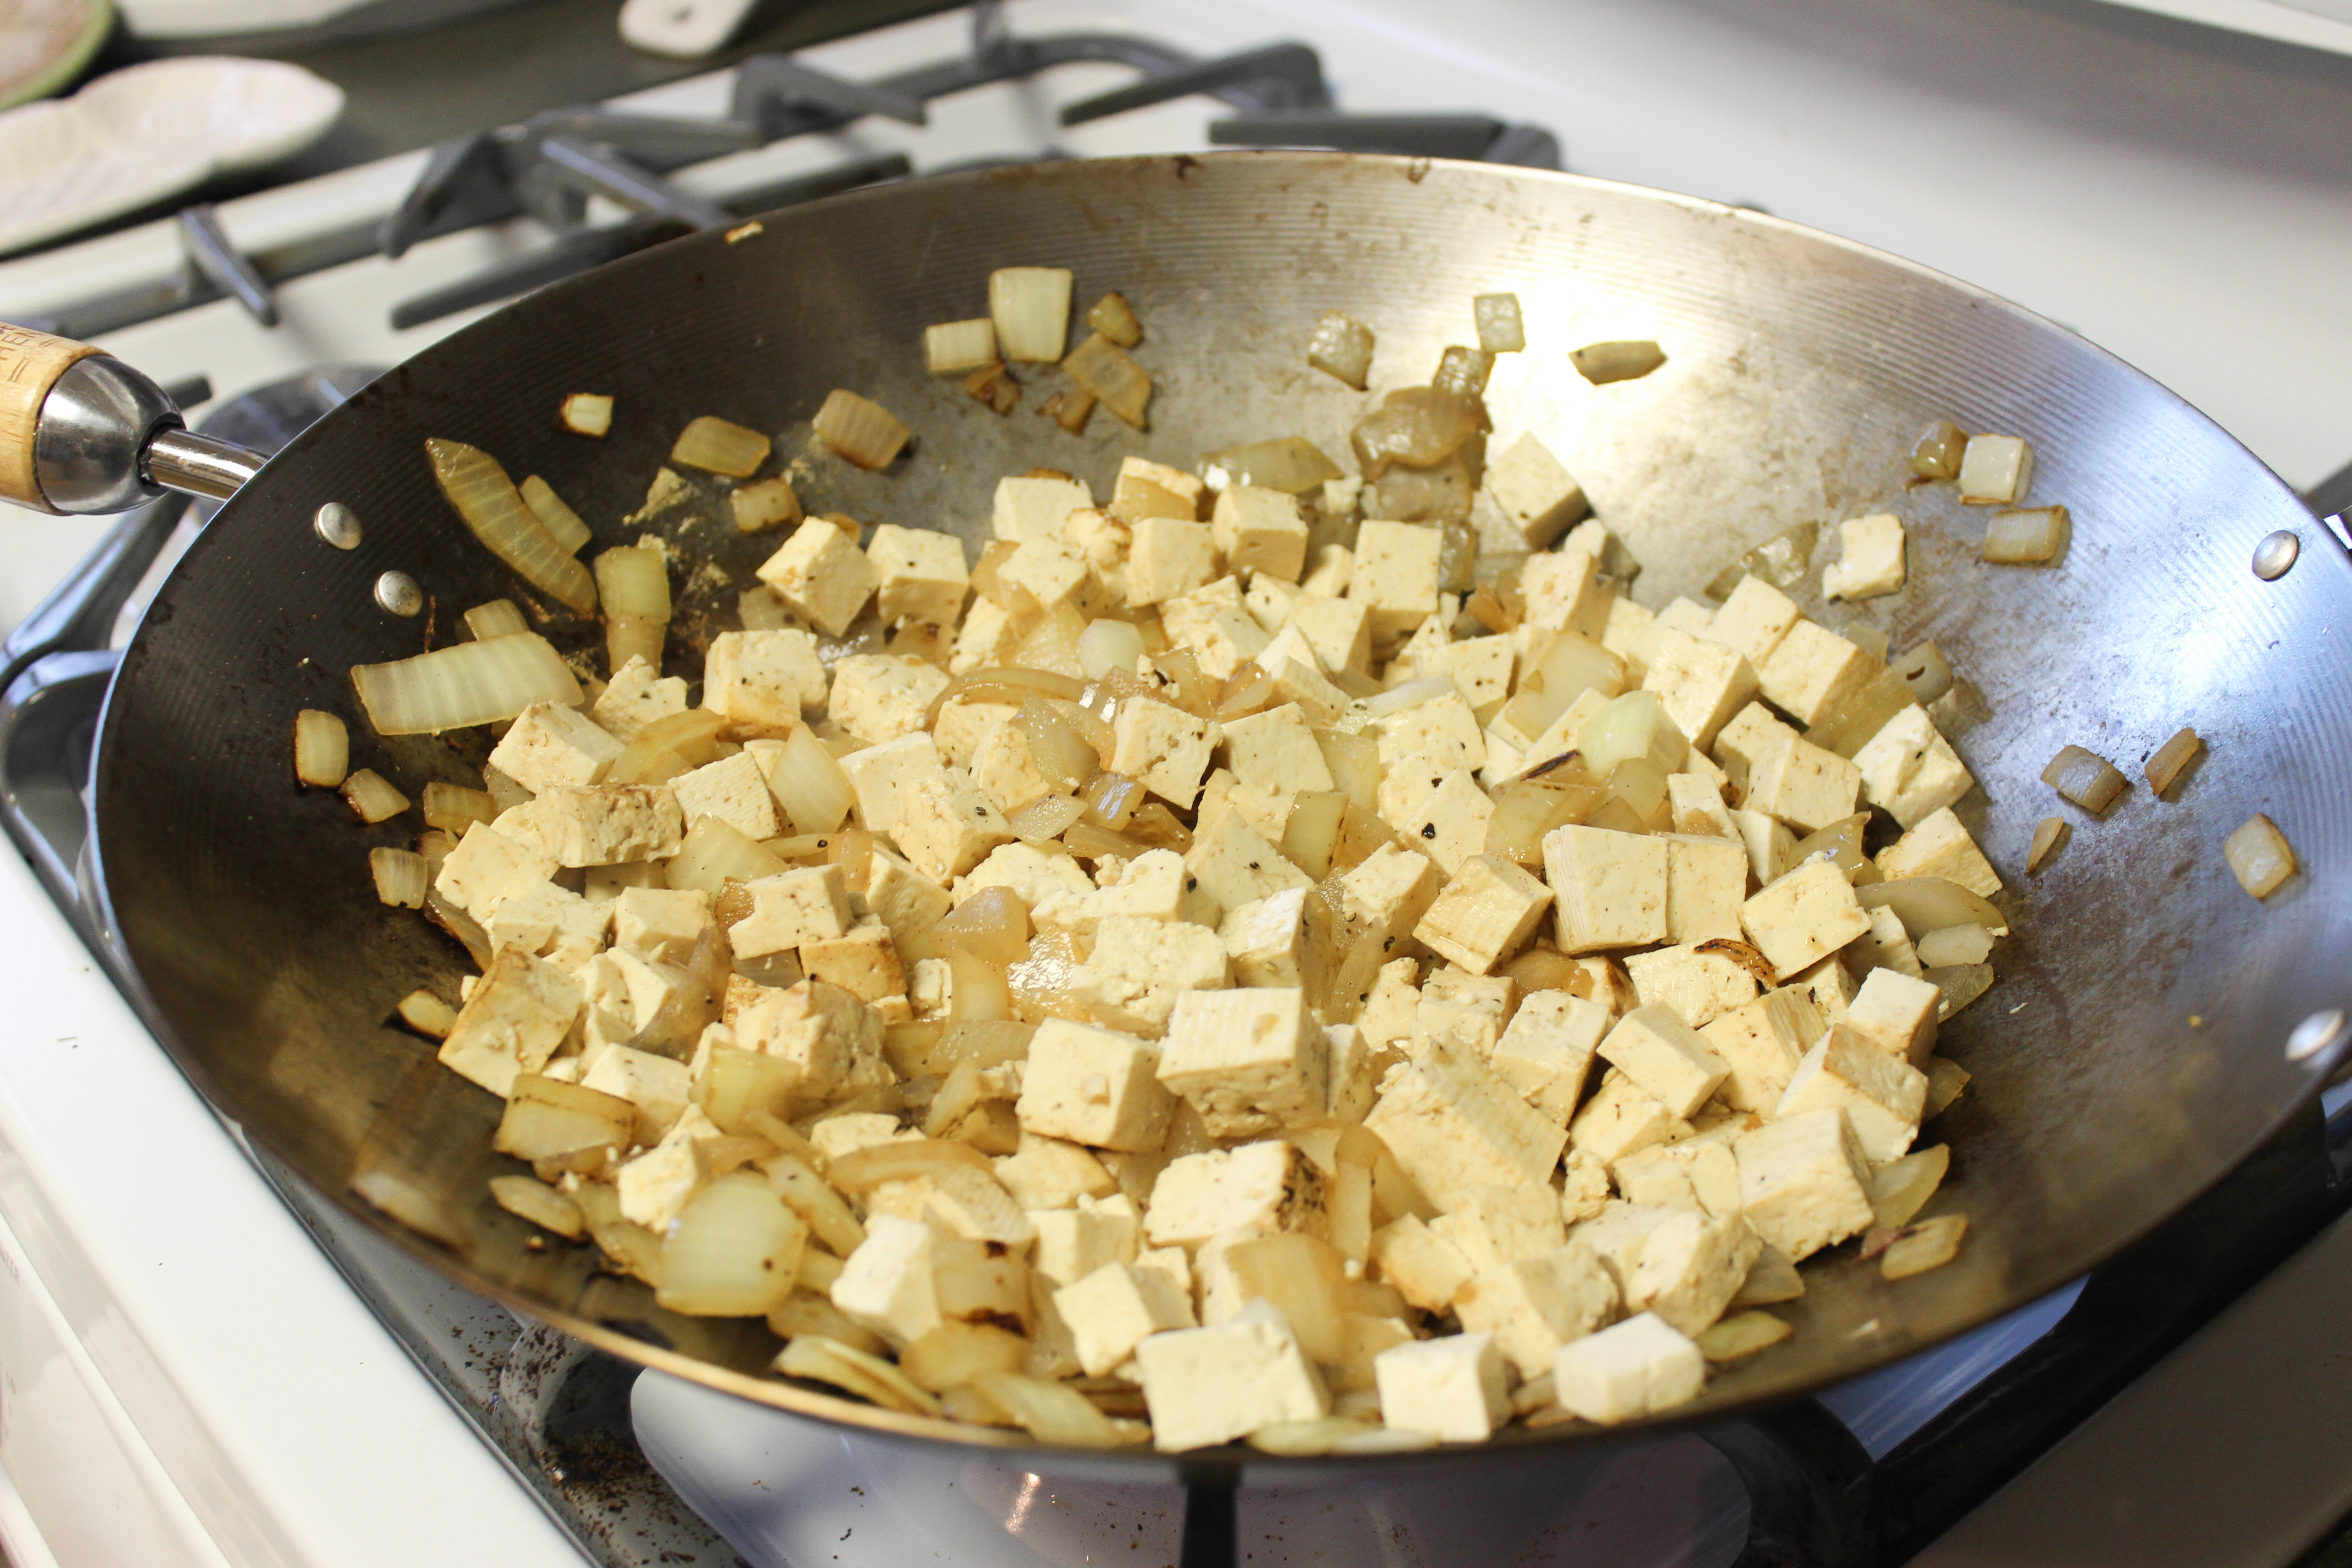 I used a wok because A. it's the largest pan I own, and B. I'm a sloppy cook and it keeps me from flipping the tofu all over the stove top while doin' the choppy choppy on that stuff.